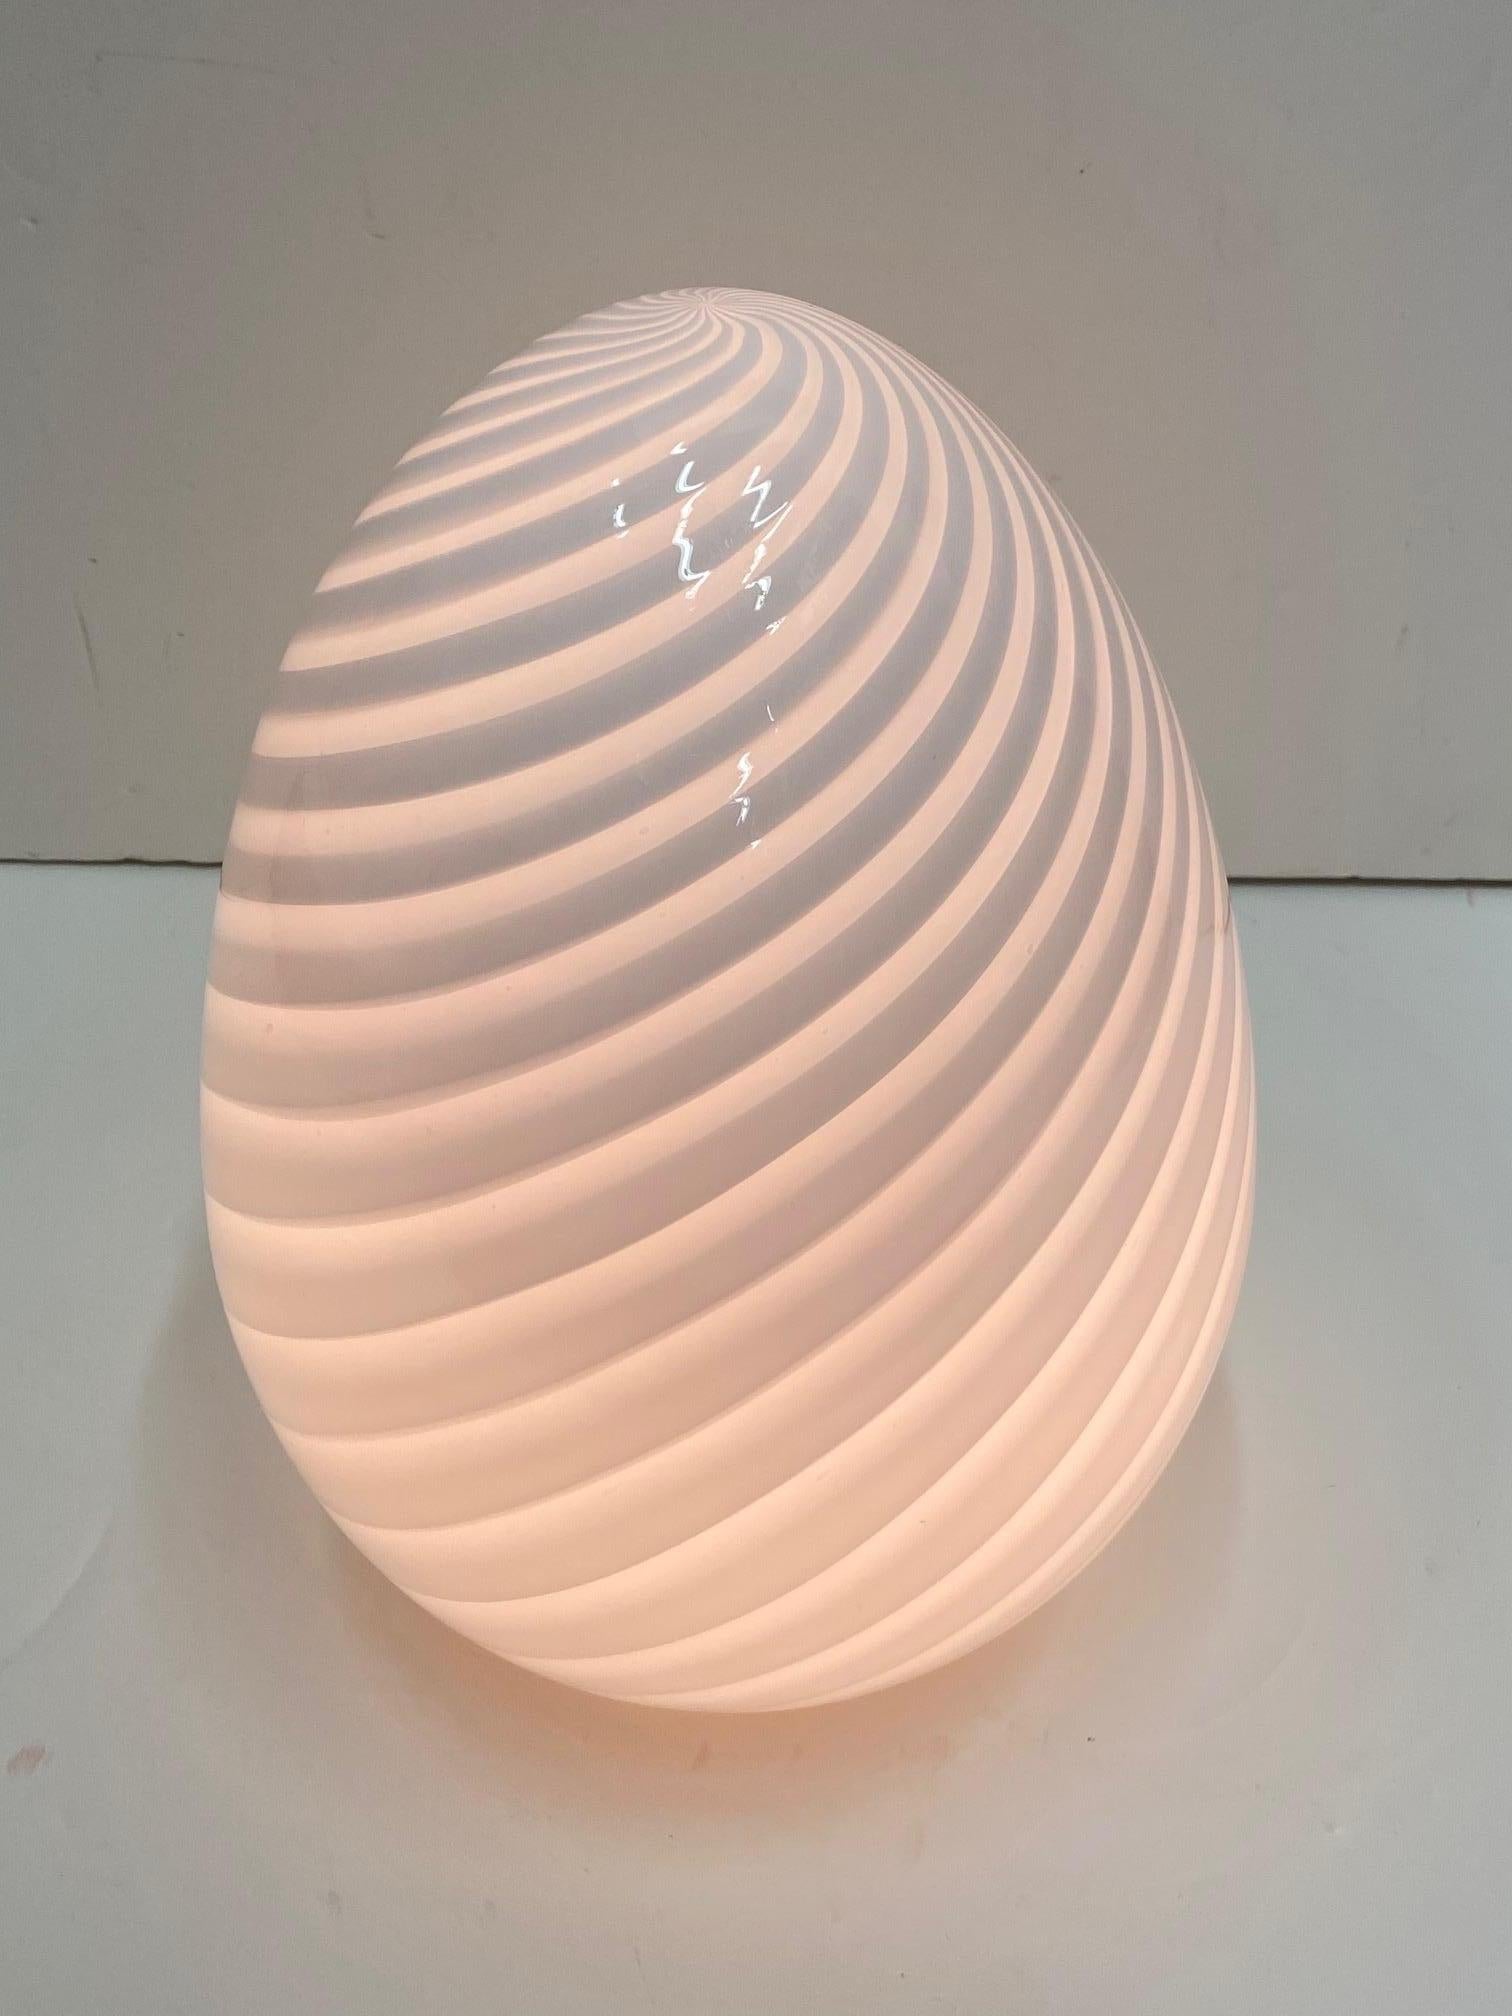 A lovely Venini Murano egg lamp, beautiful unlit and a glowing piece of art when illuminated.

Note: We also have a slightly larger egg lamp available.